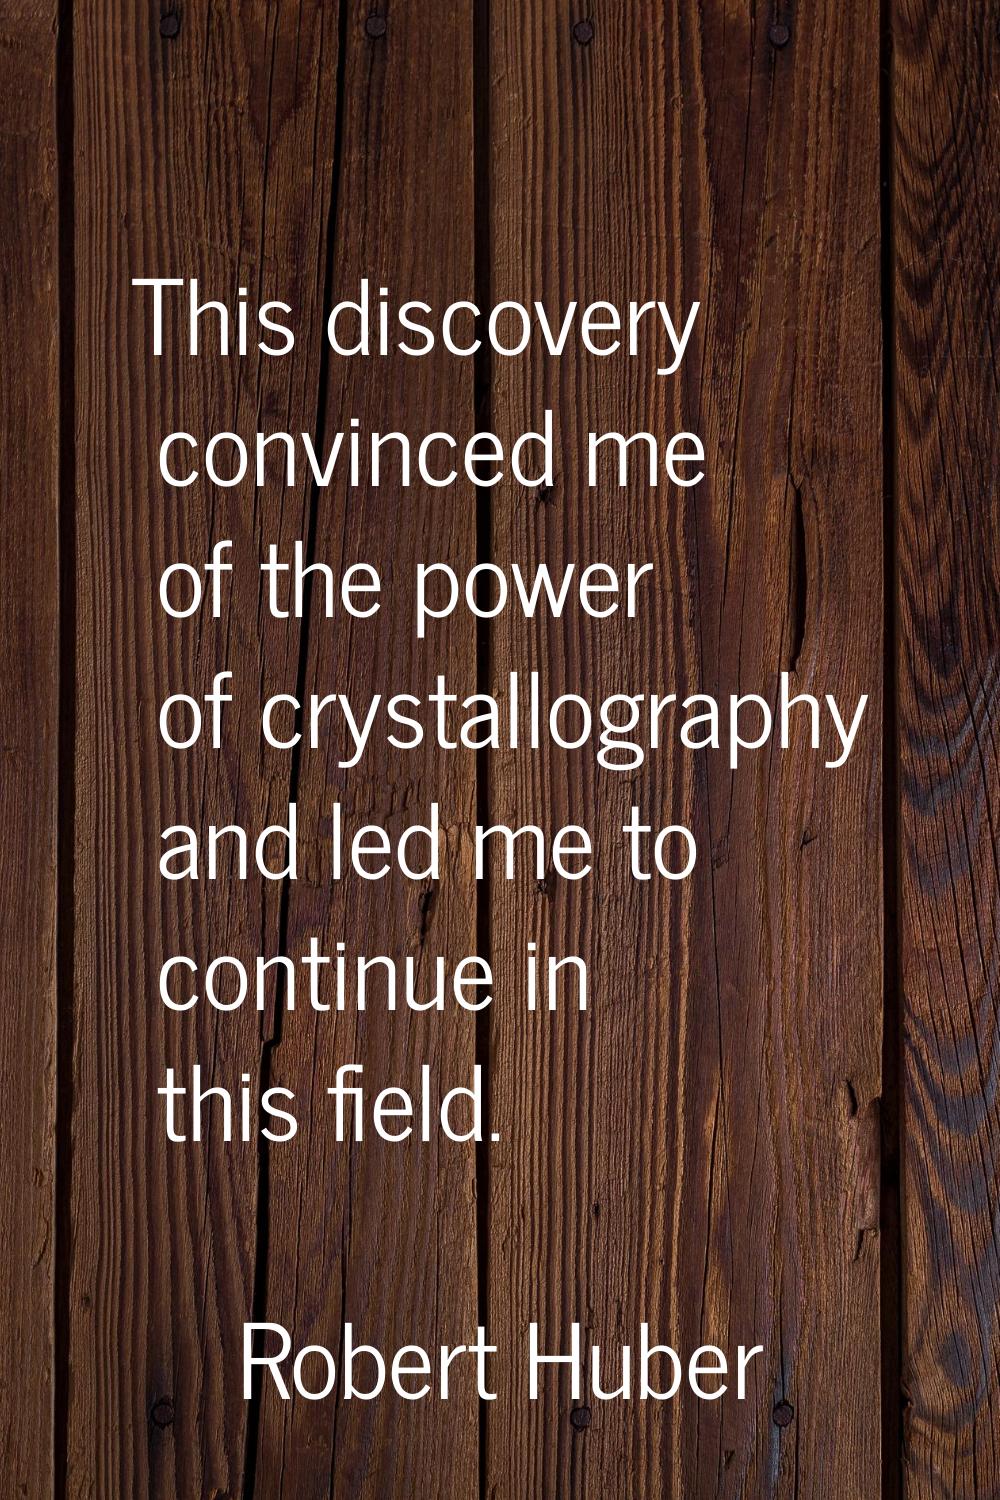 This discovery convinced me of the power of crystallography and led me to continue in this field.